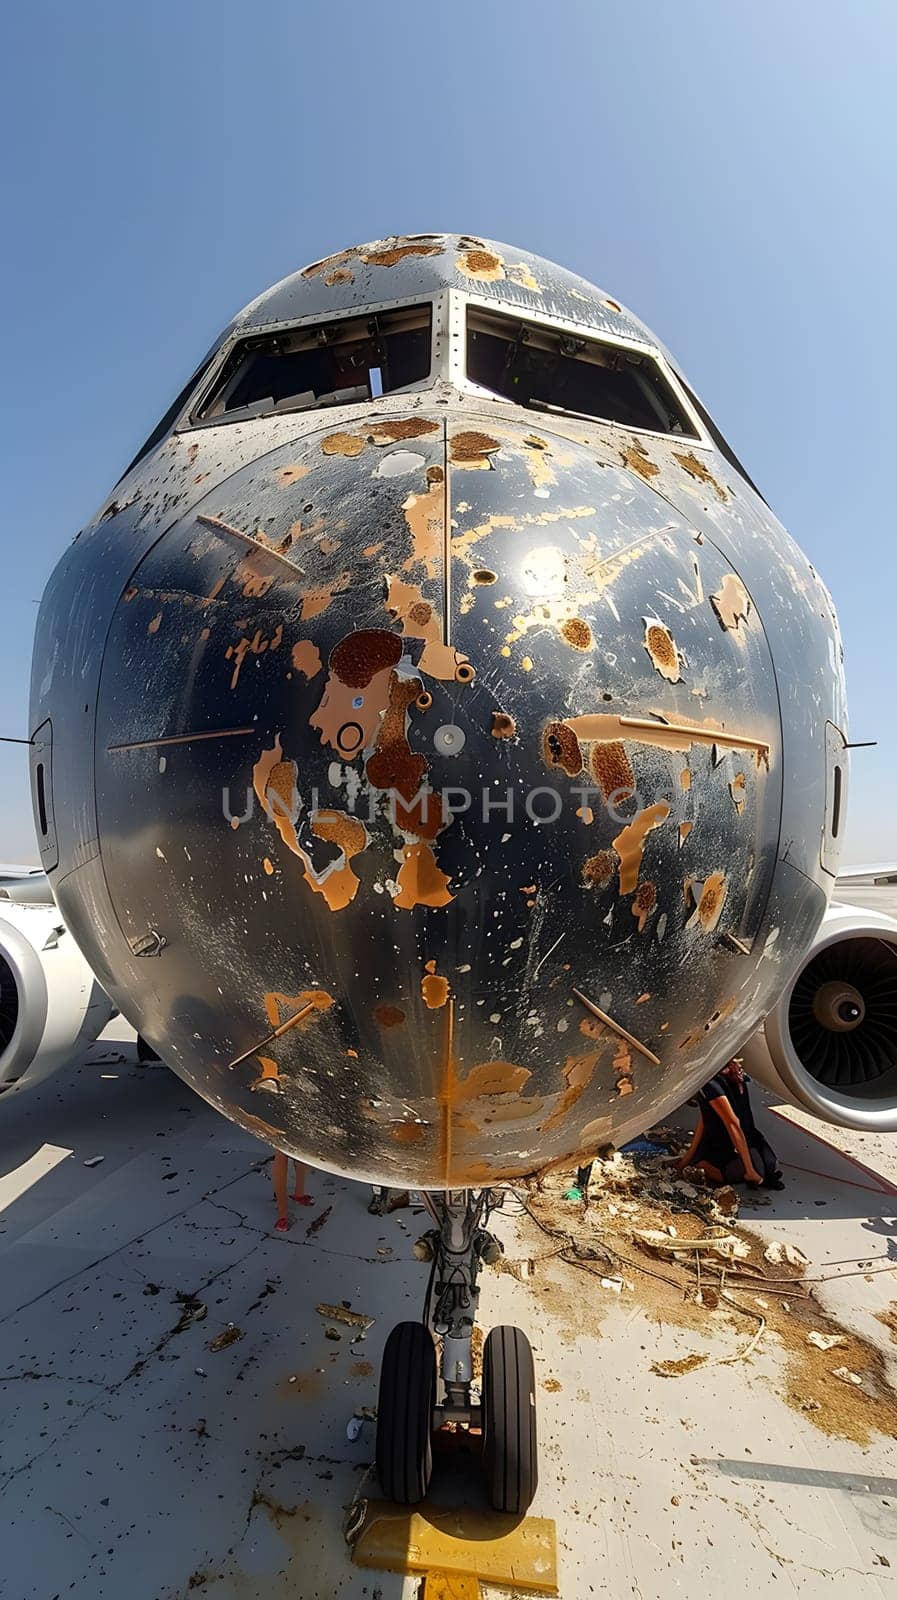 A close up of a rusted aircraft against a bright blue sky by Nadtochiy